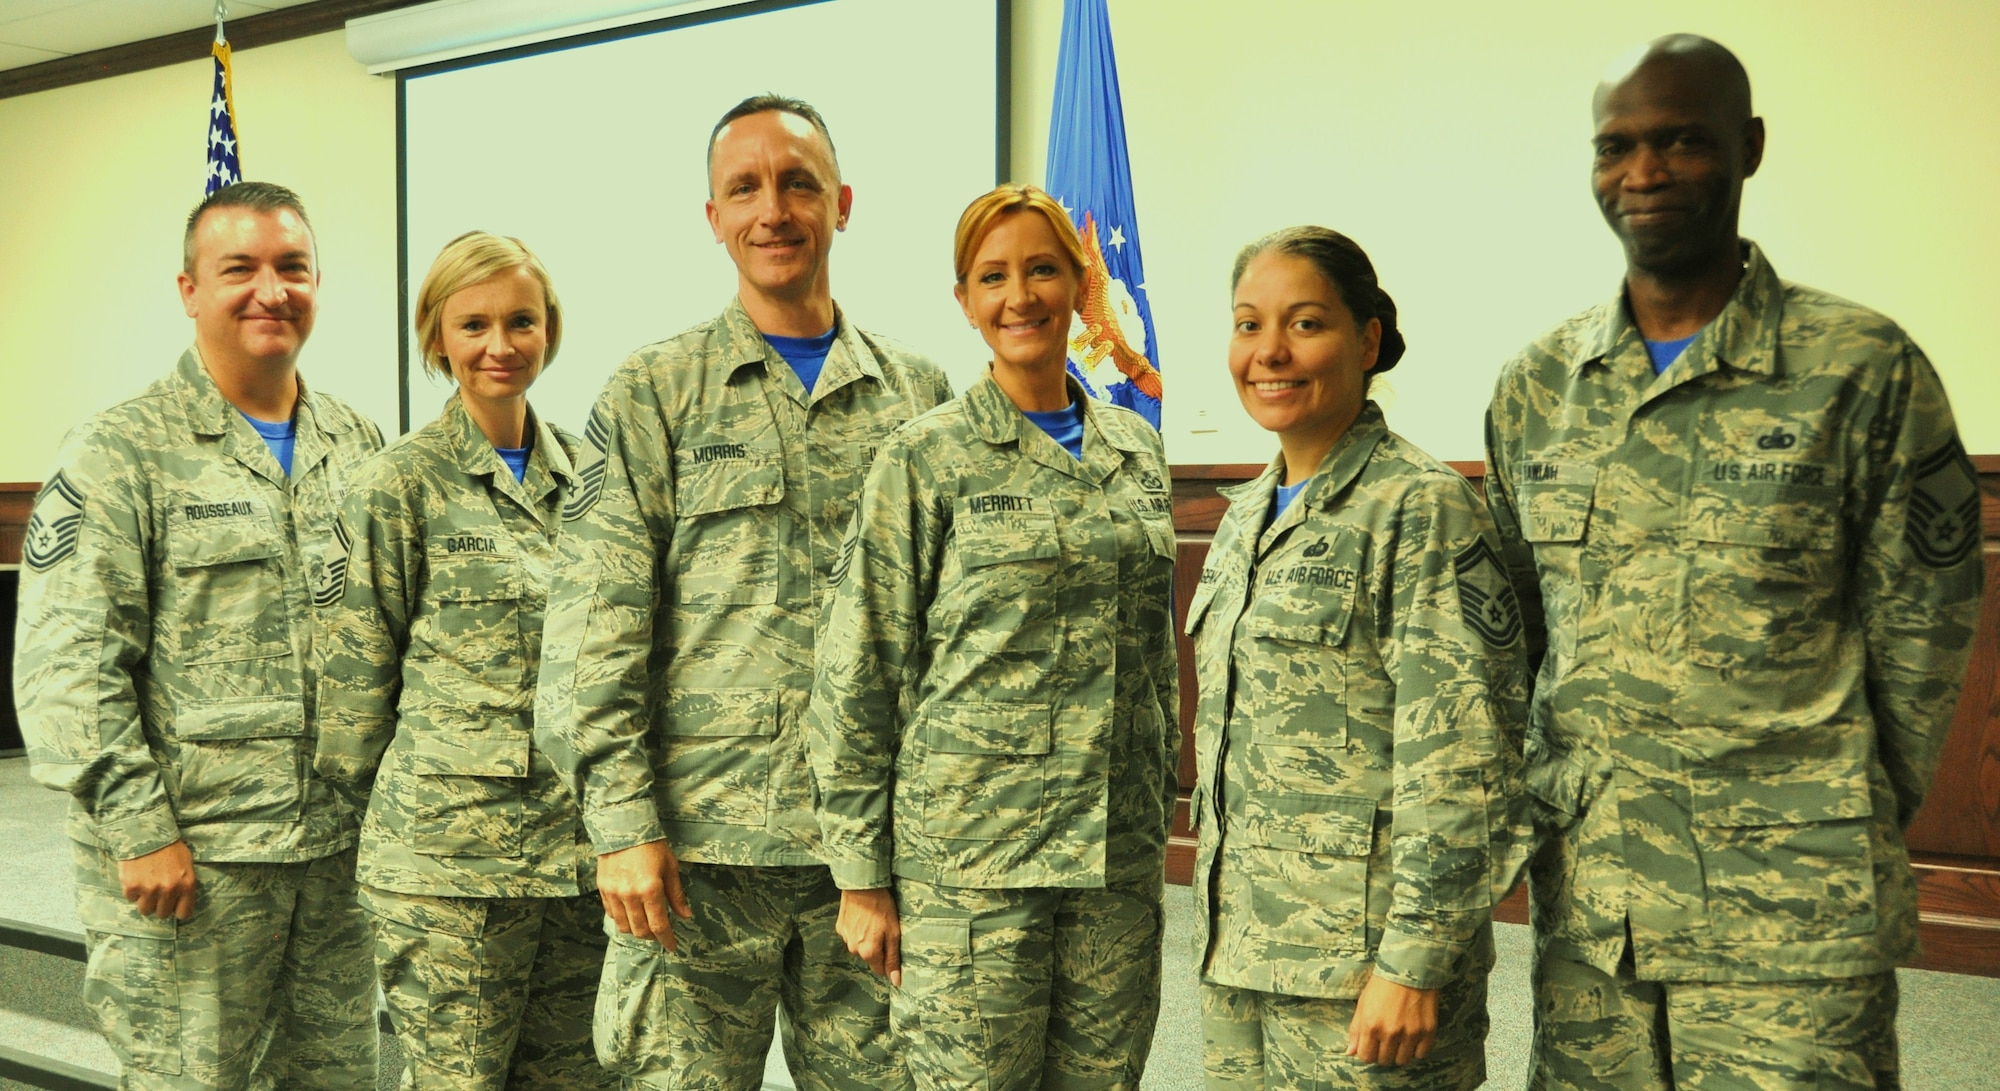 Chief Master Sgt. Jimmie Morris, 340th FTG  group superintendent (center) stands with Senior Master Sgts. (L to R) Jon Rousseaux, Laura Garcia, Laura Merritt, Michele Cartagena and Kwame Tawiah during the Group's MUTA held Dec. 1-2 at Joint Base San Antonio-Randolph, Texas as 340 FTG commander, Col. Roger Suro recognizes them for the leadership and mentorship they provide to the junior enlisted Airmen (Photo by Janis El Shabazz).

